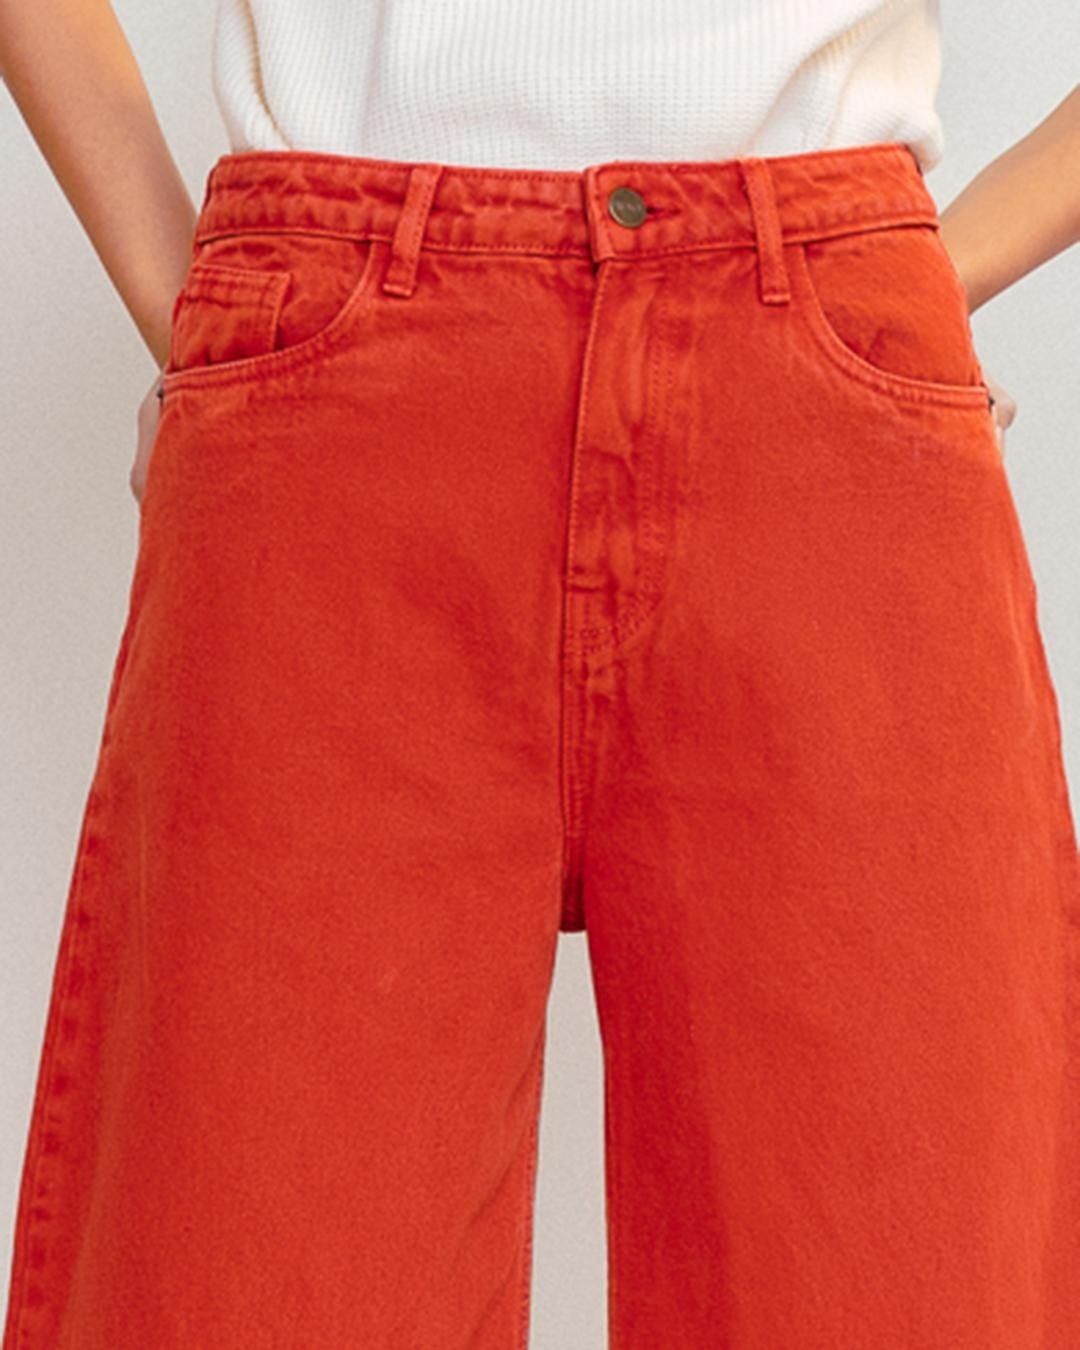 Buy Women's Red Flared Jeans Online at Bewakoof